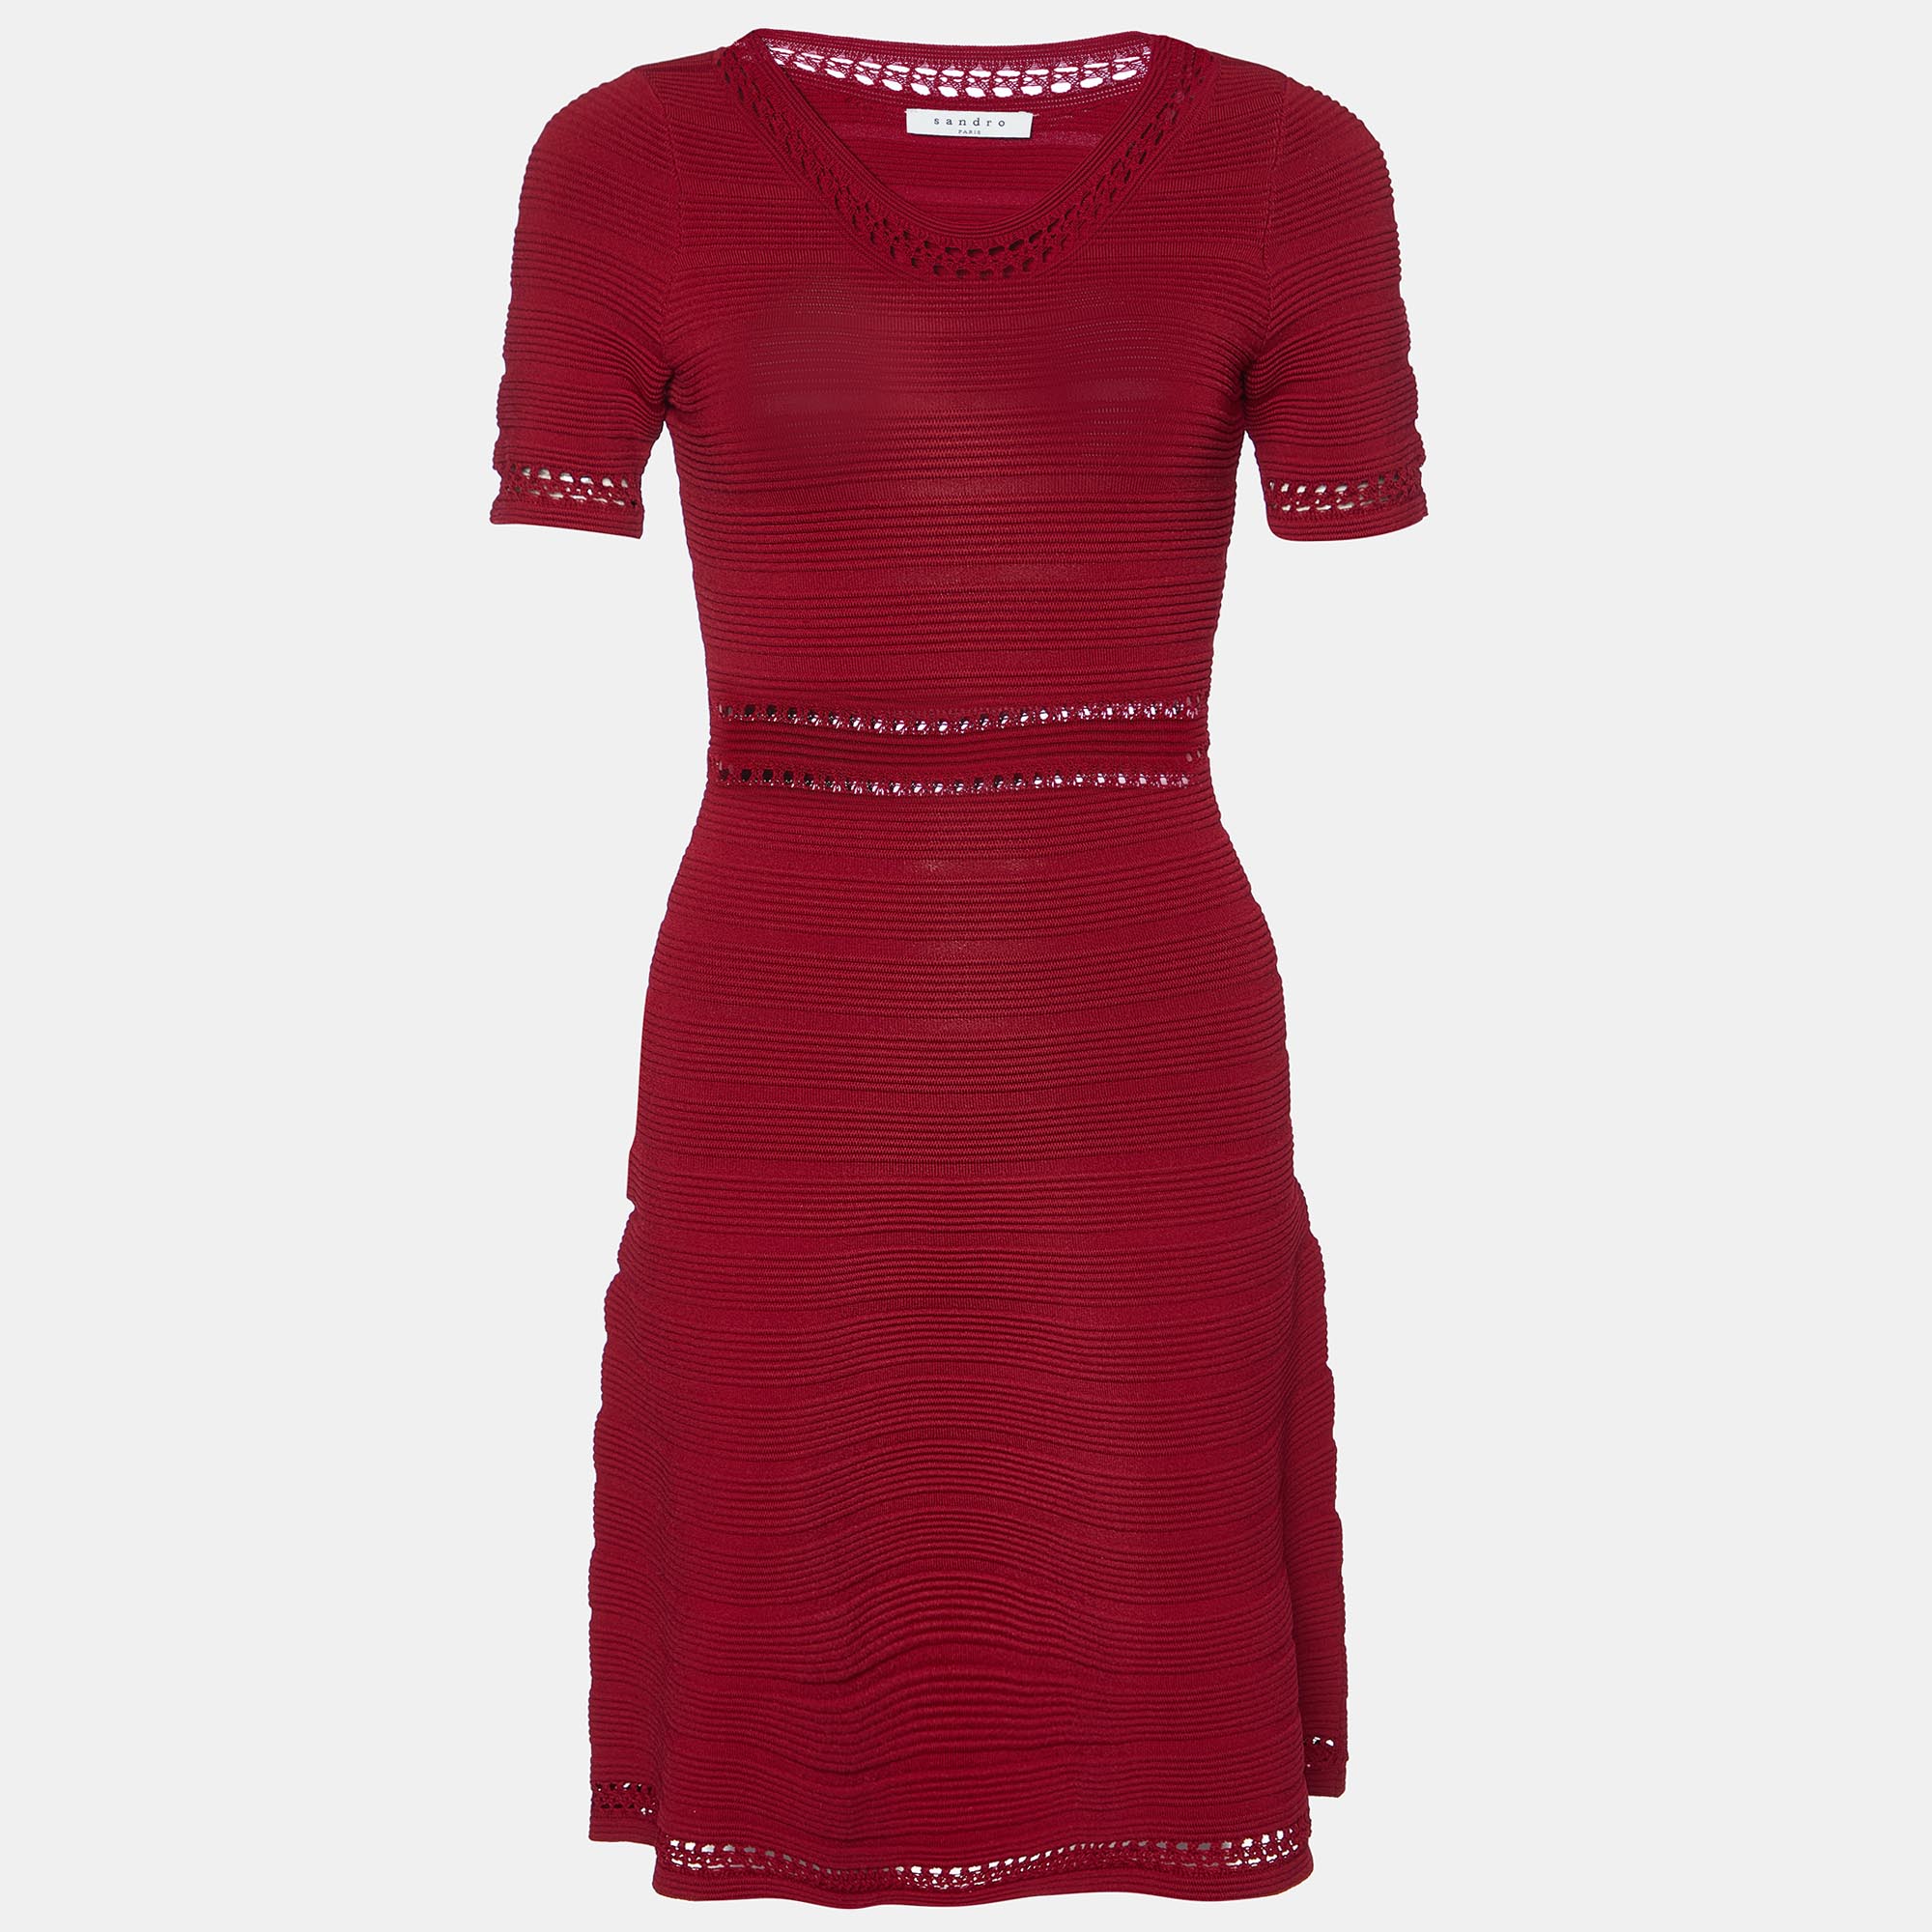 Sandro red textured stretch knit flared dress s